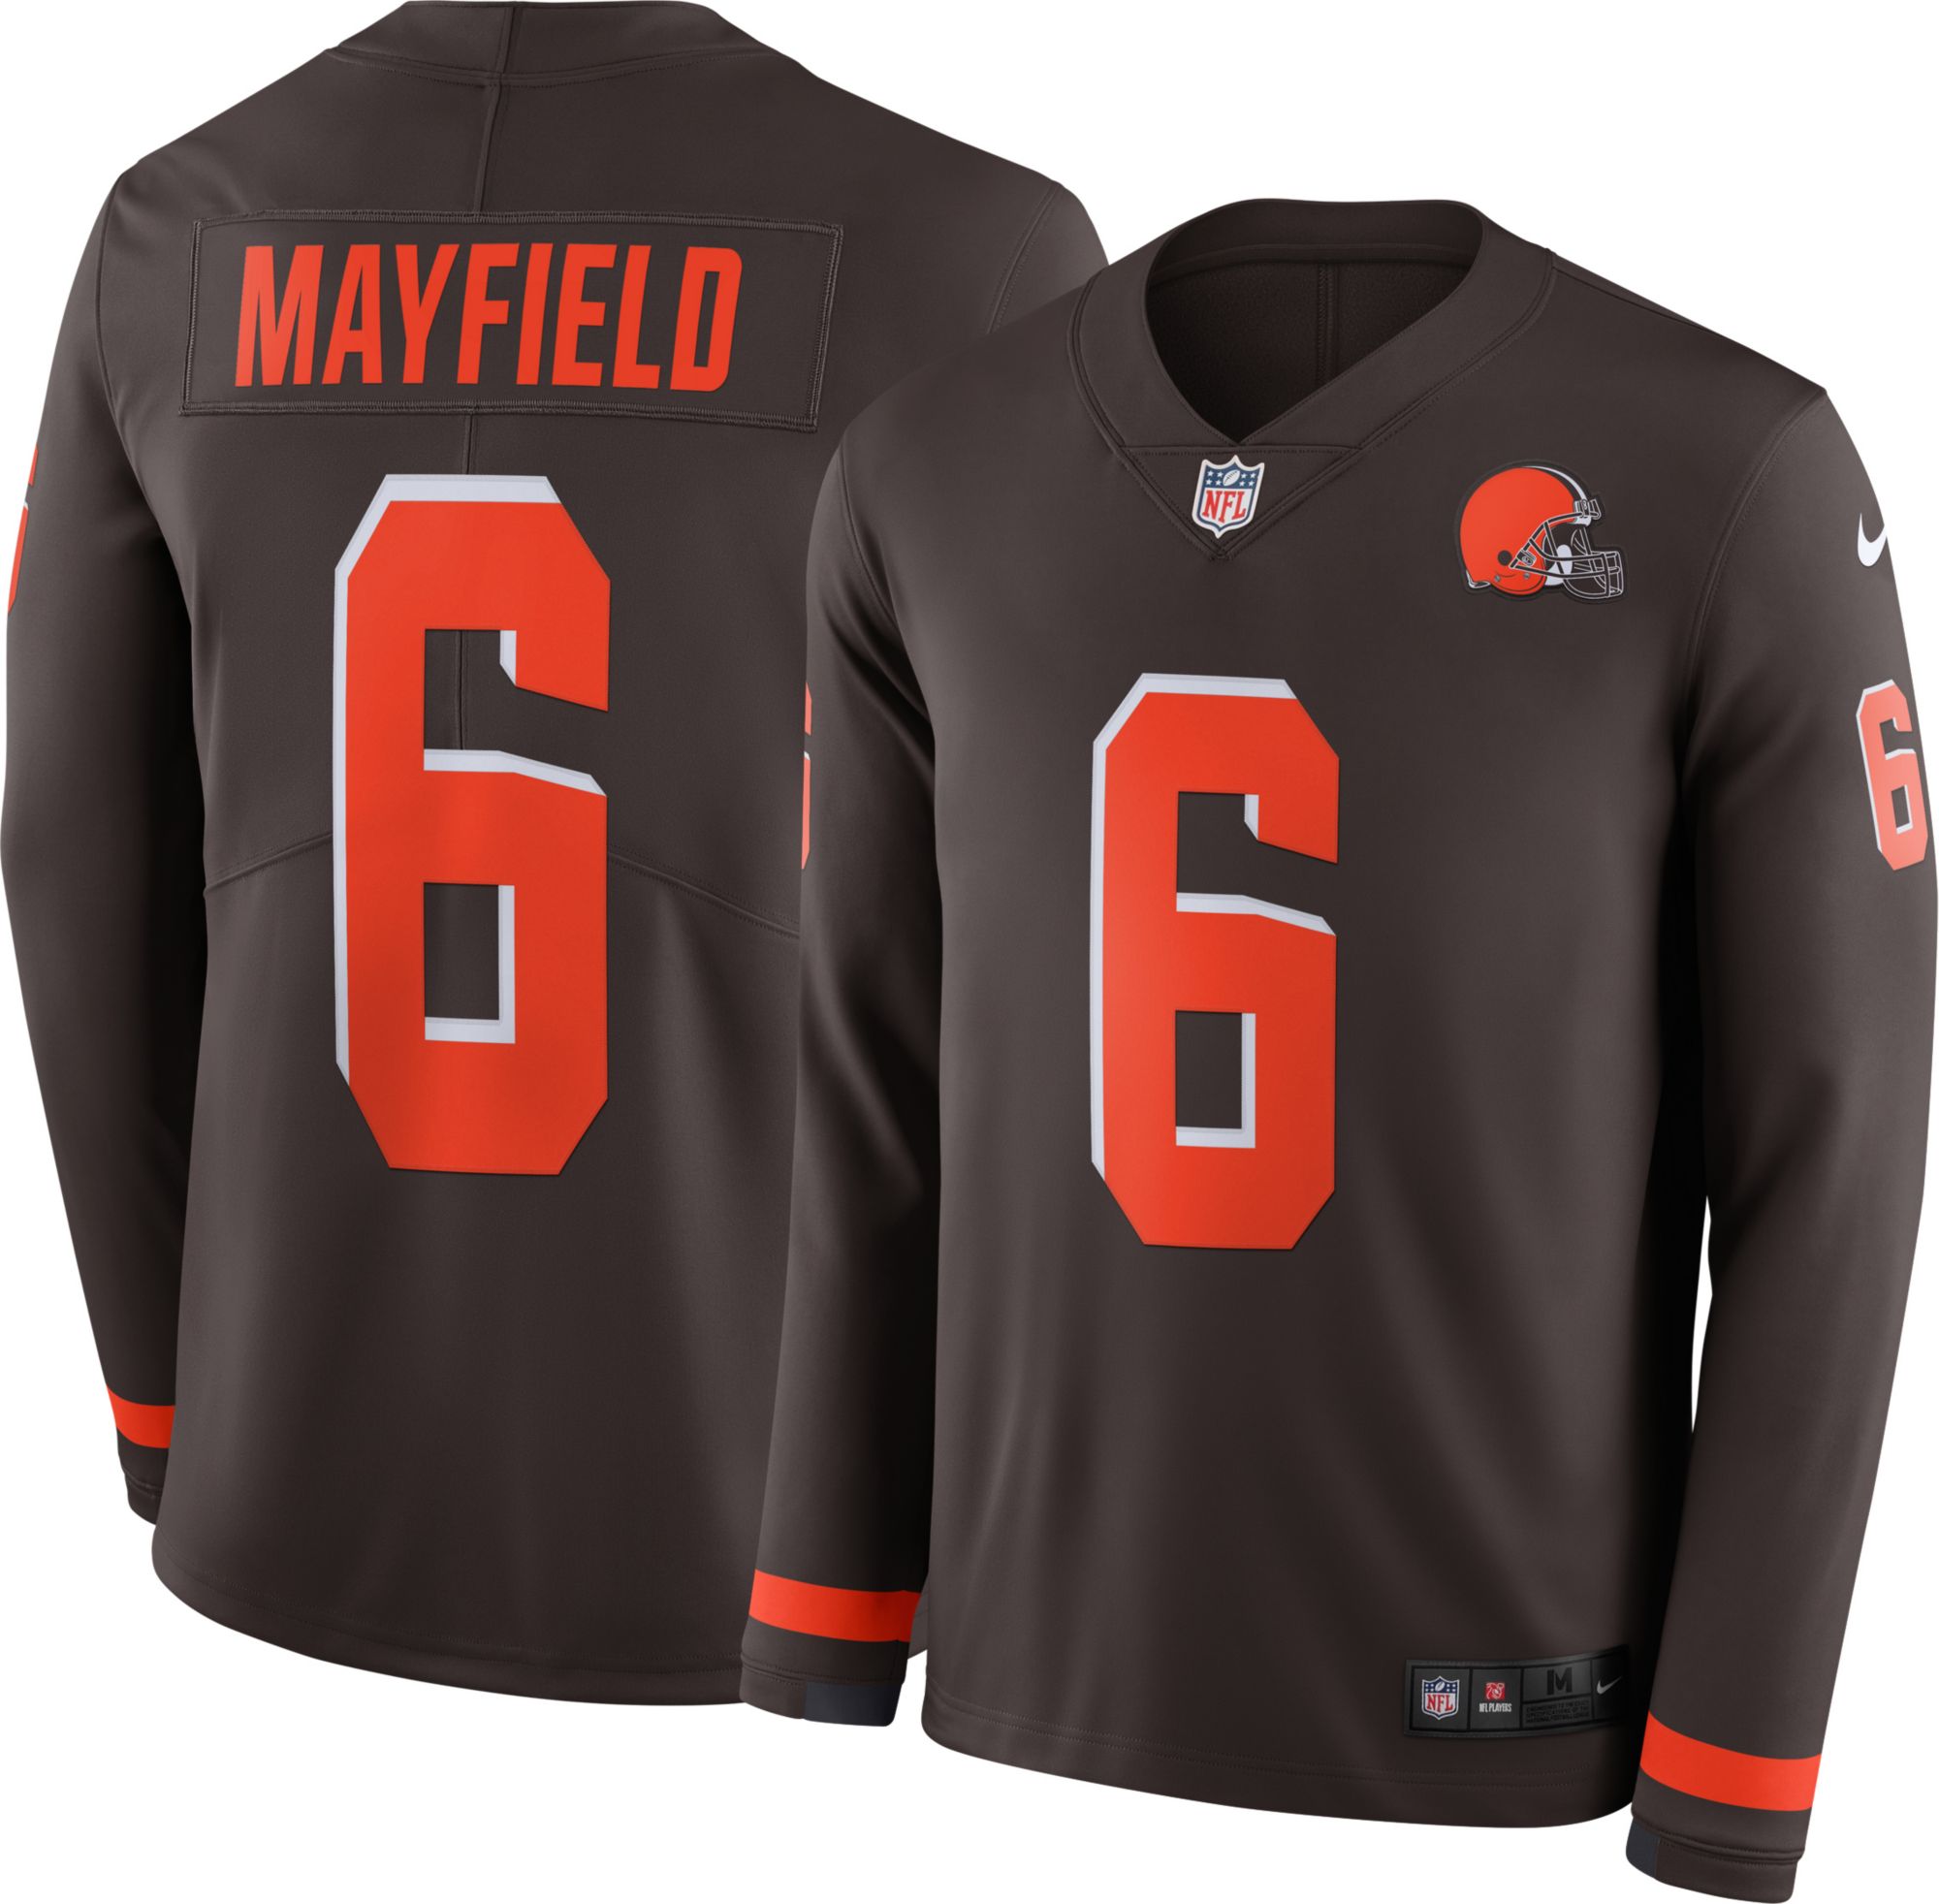 cleveland browns long sleeve jersey